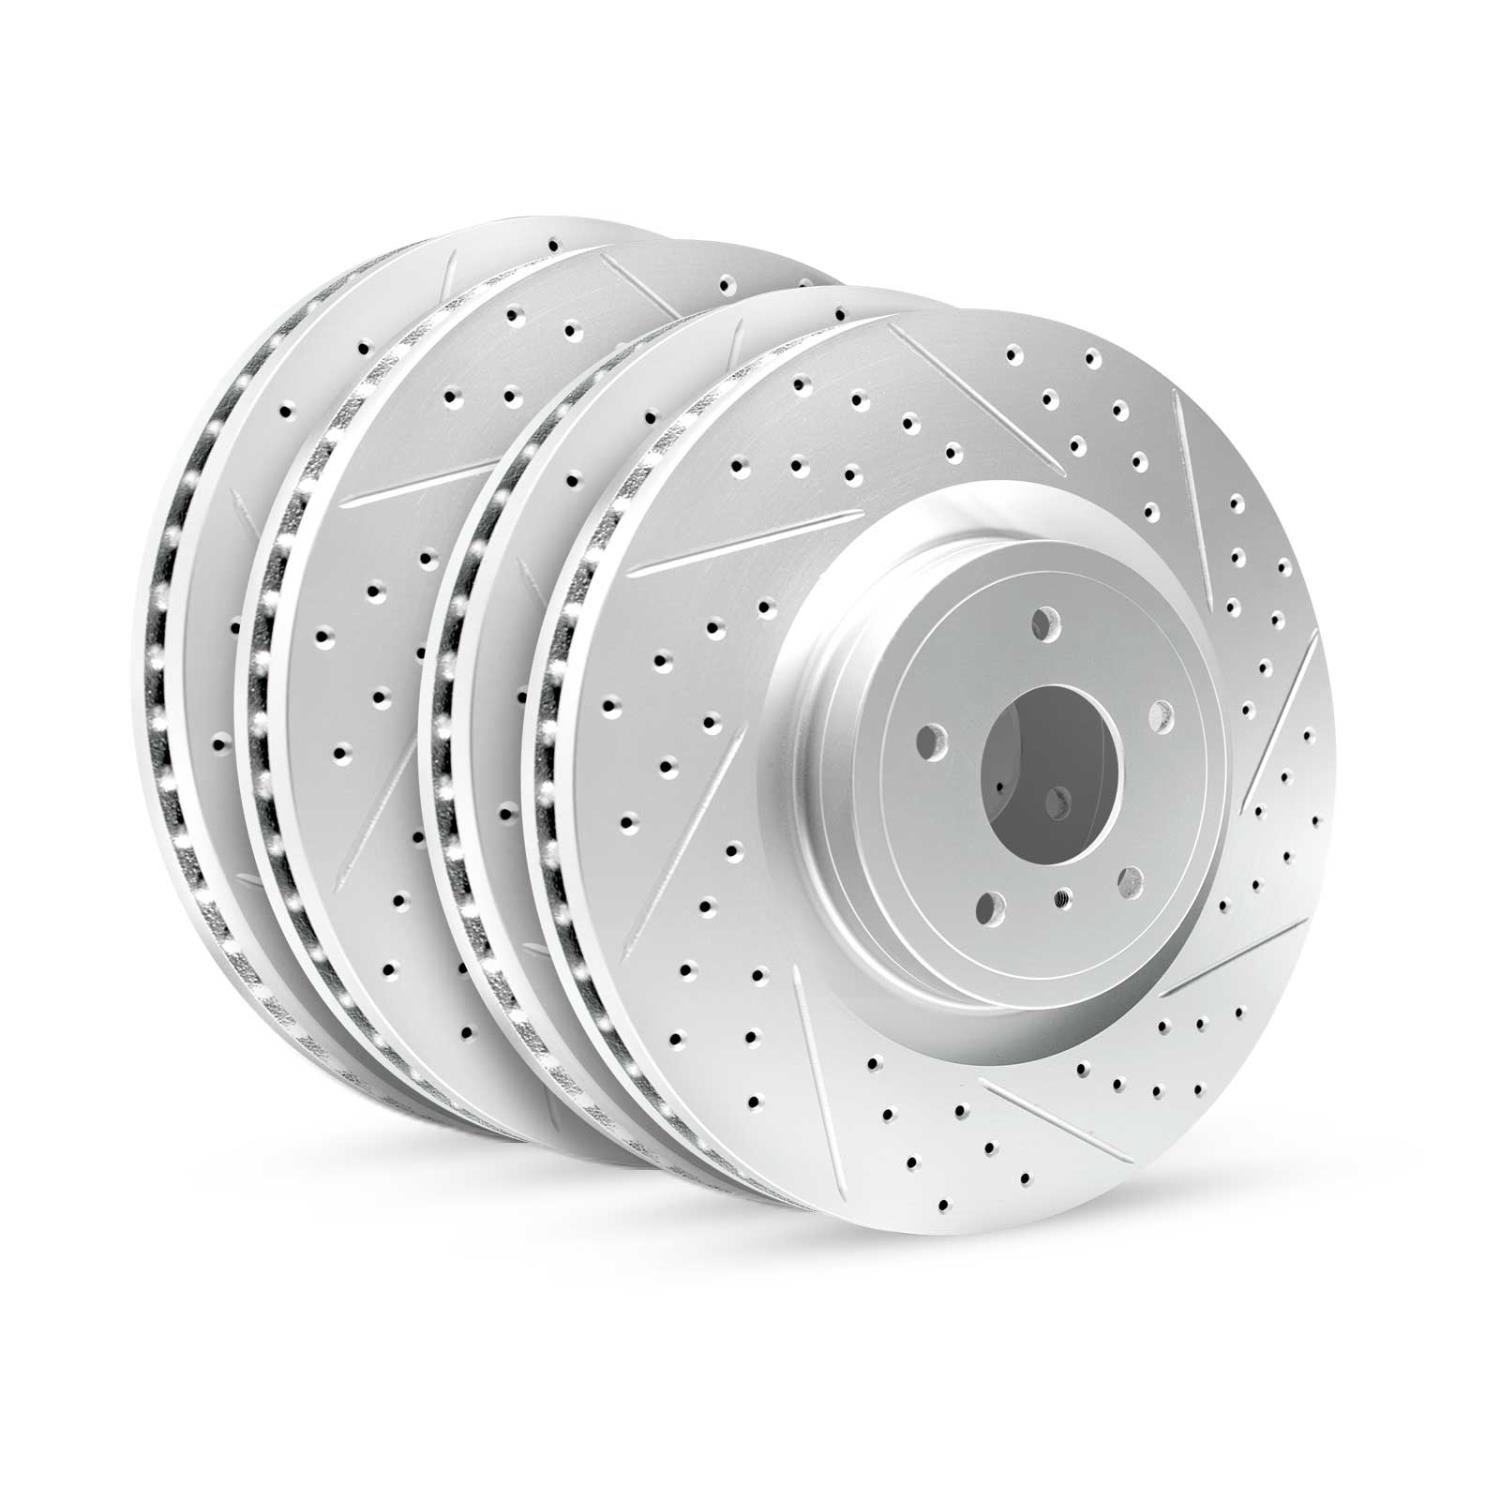 GEO-Carbon Drilled/Slotted Rotors, 2001-2003 Audi/Porsche/Volkswagen, Position: Front/Rear